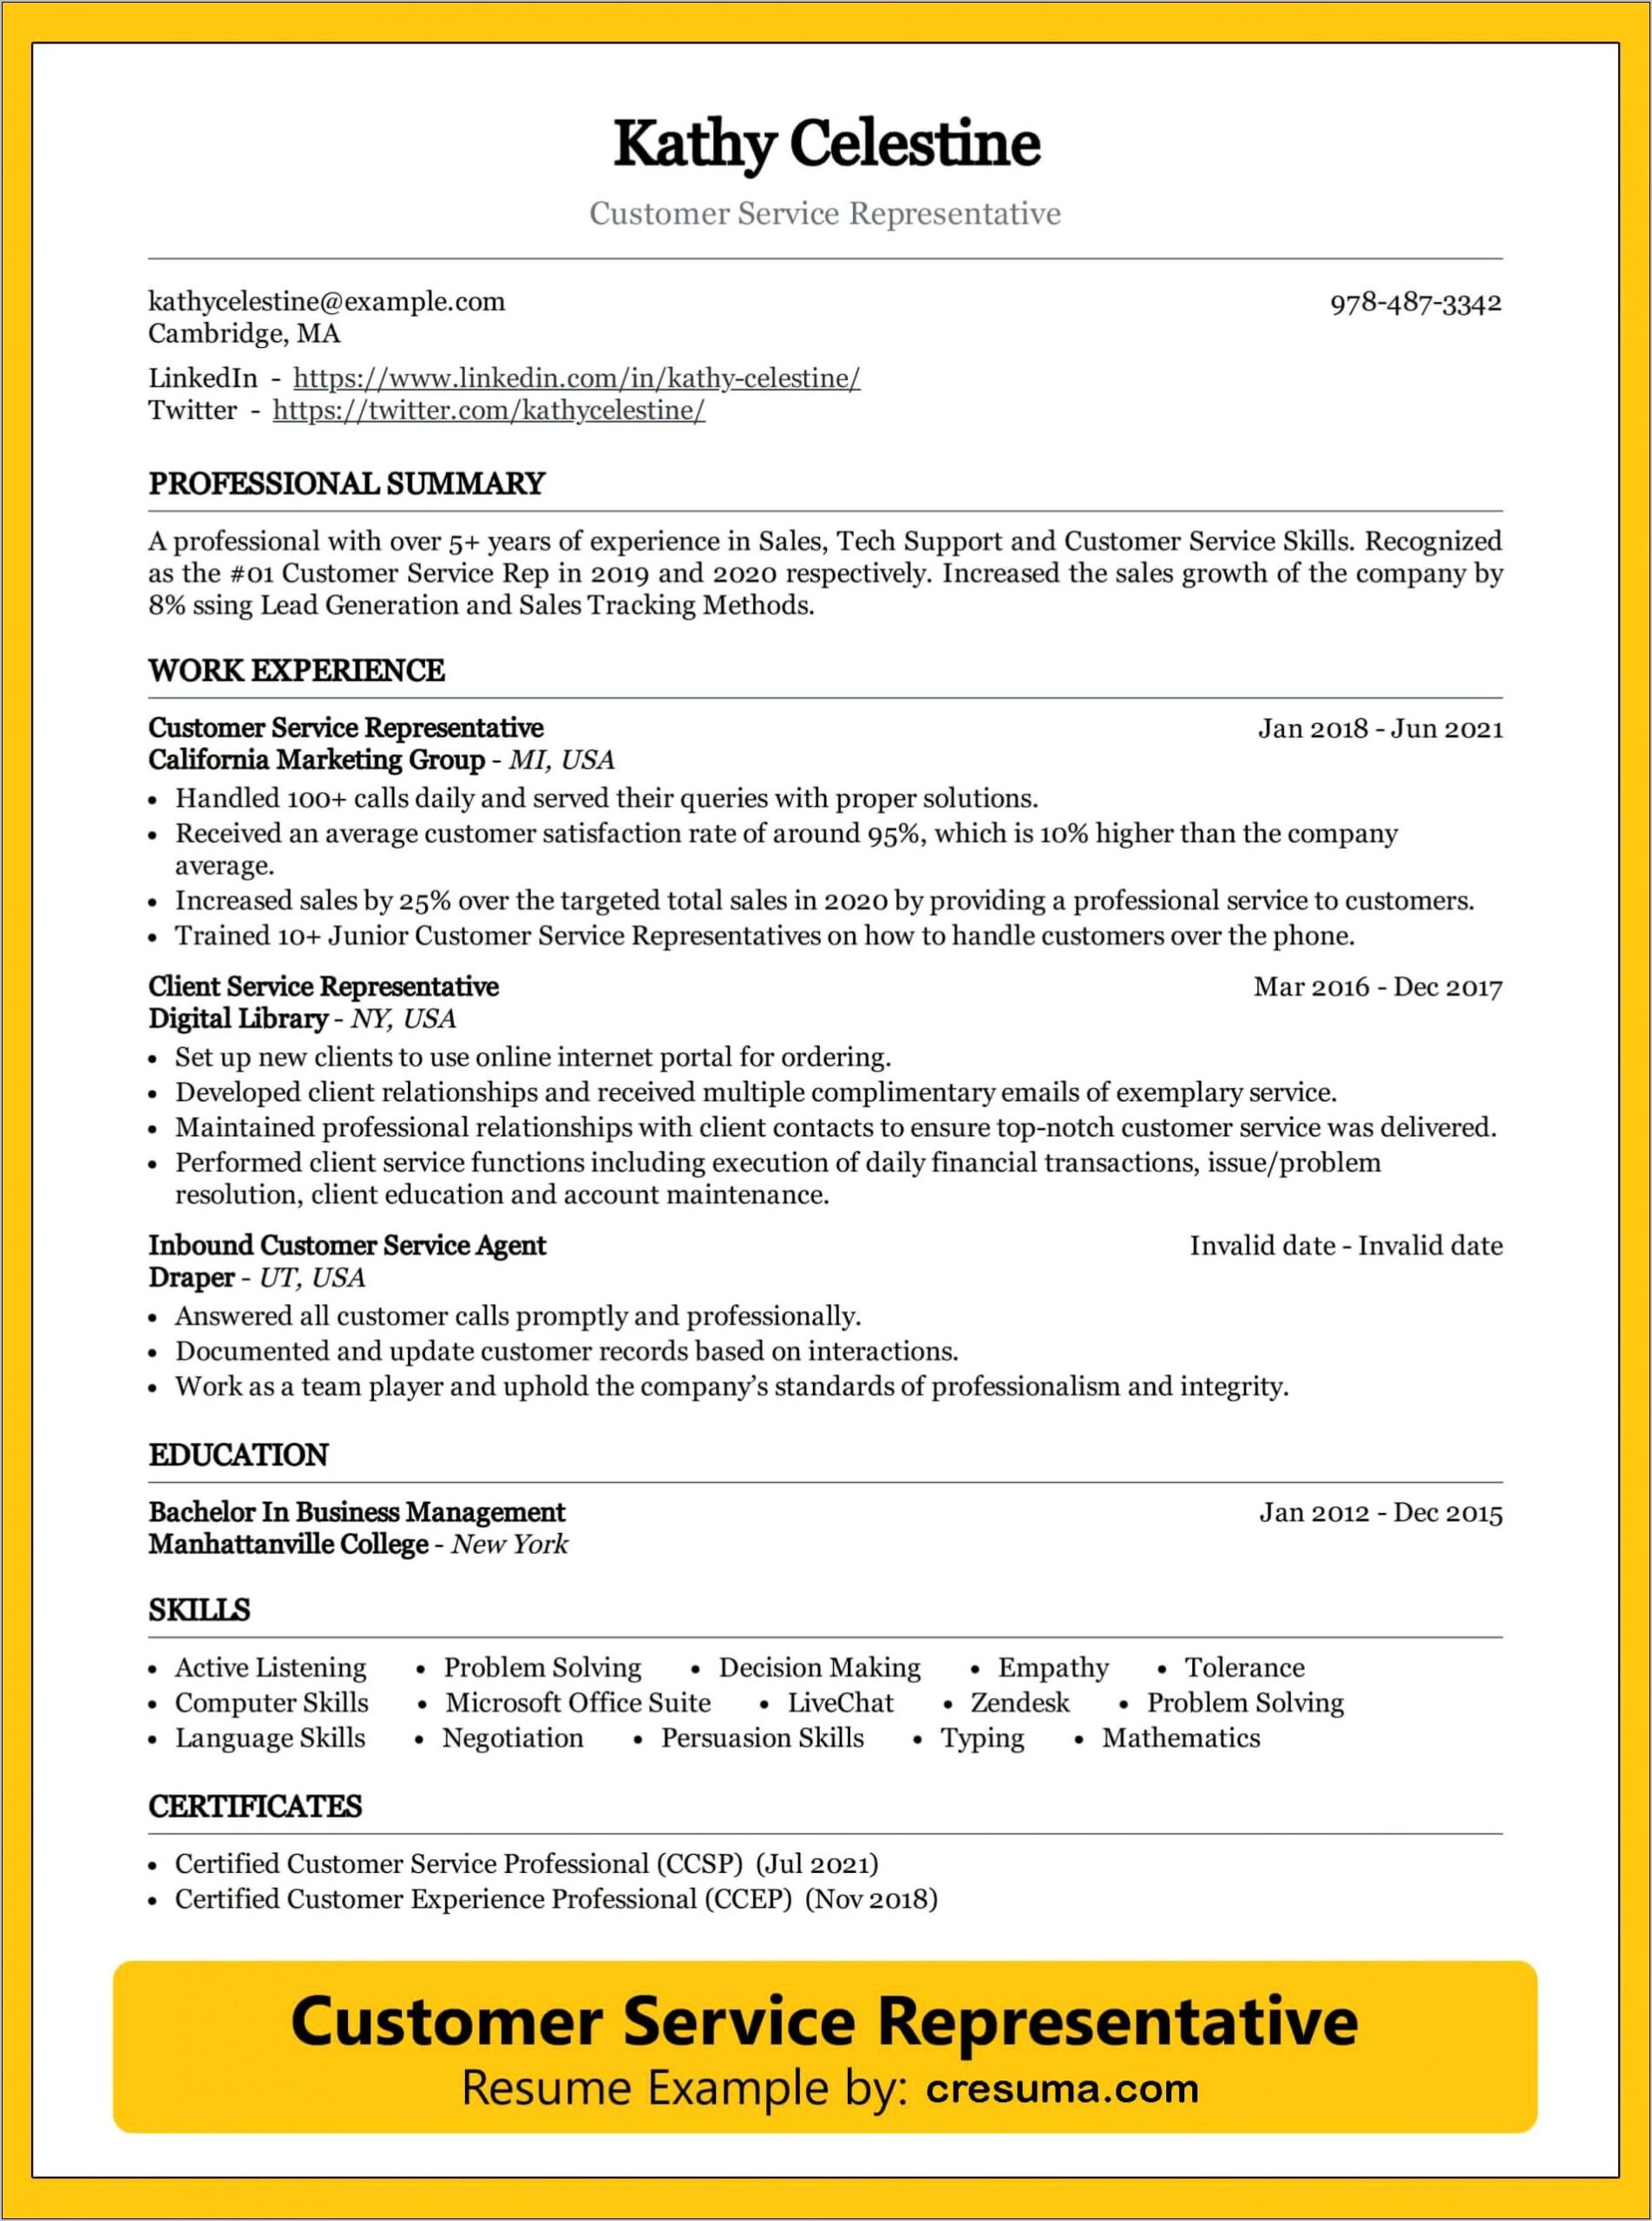 Resume Examples 2019 Customer Service